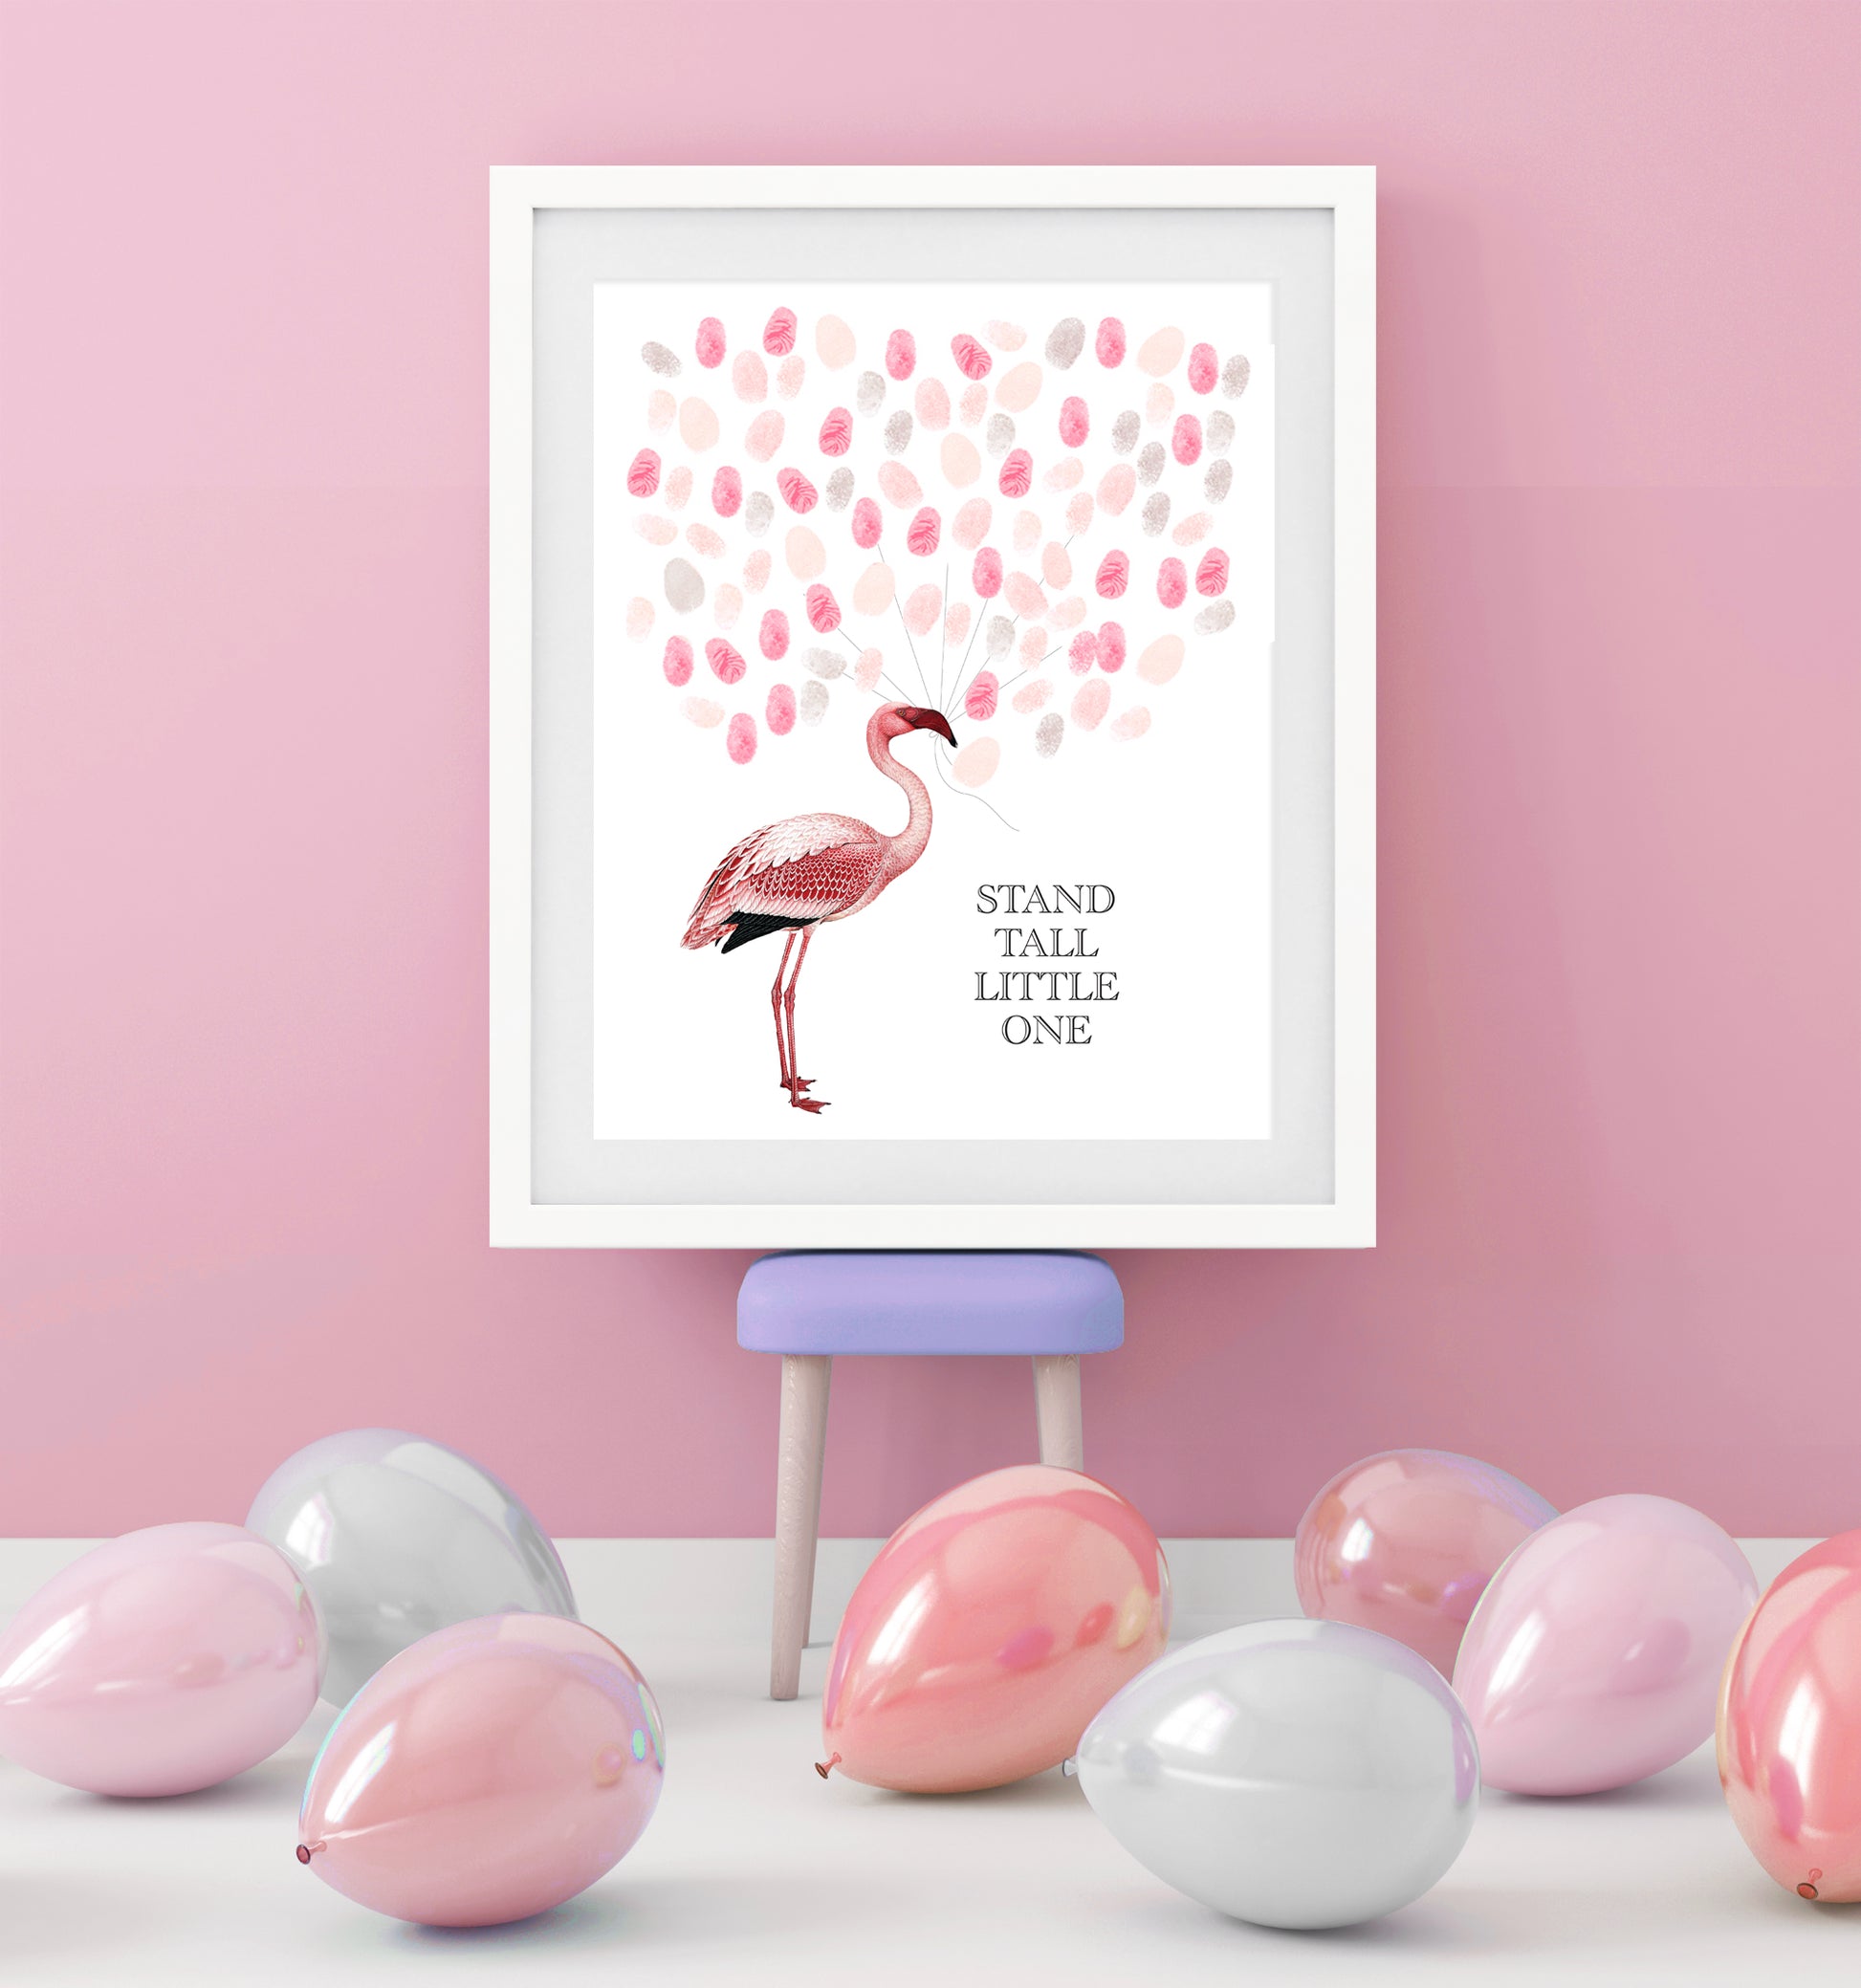 pink party room with flamingo guest book print in frame featuring a beautiful vintage flamingo illustration holding guests fingerprints as balloons